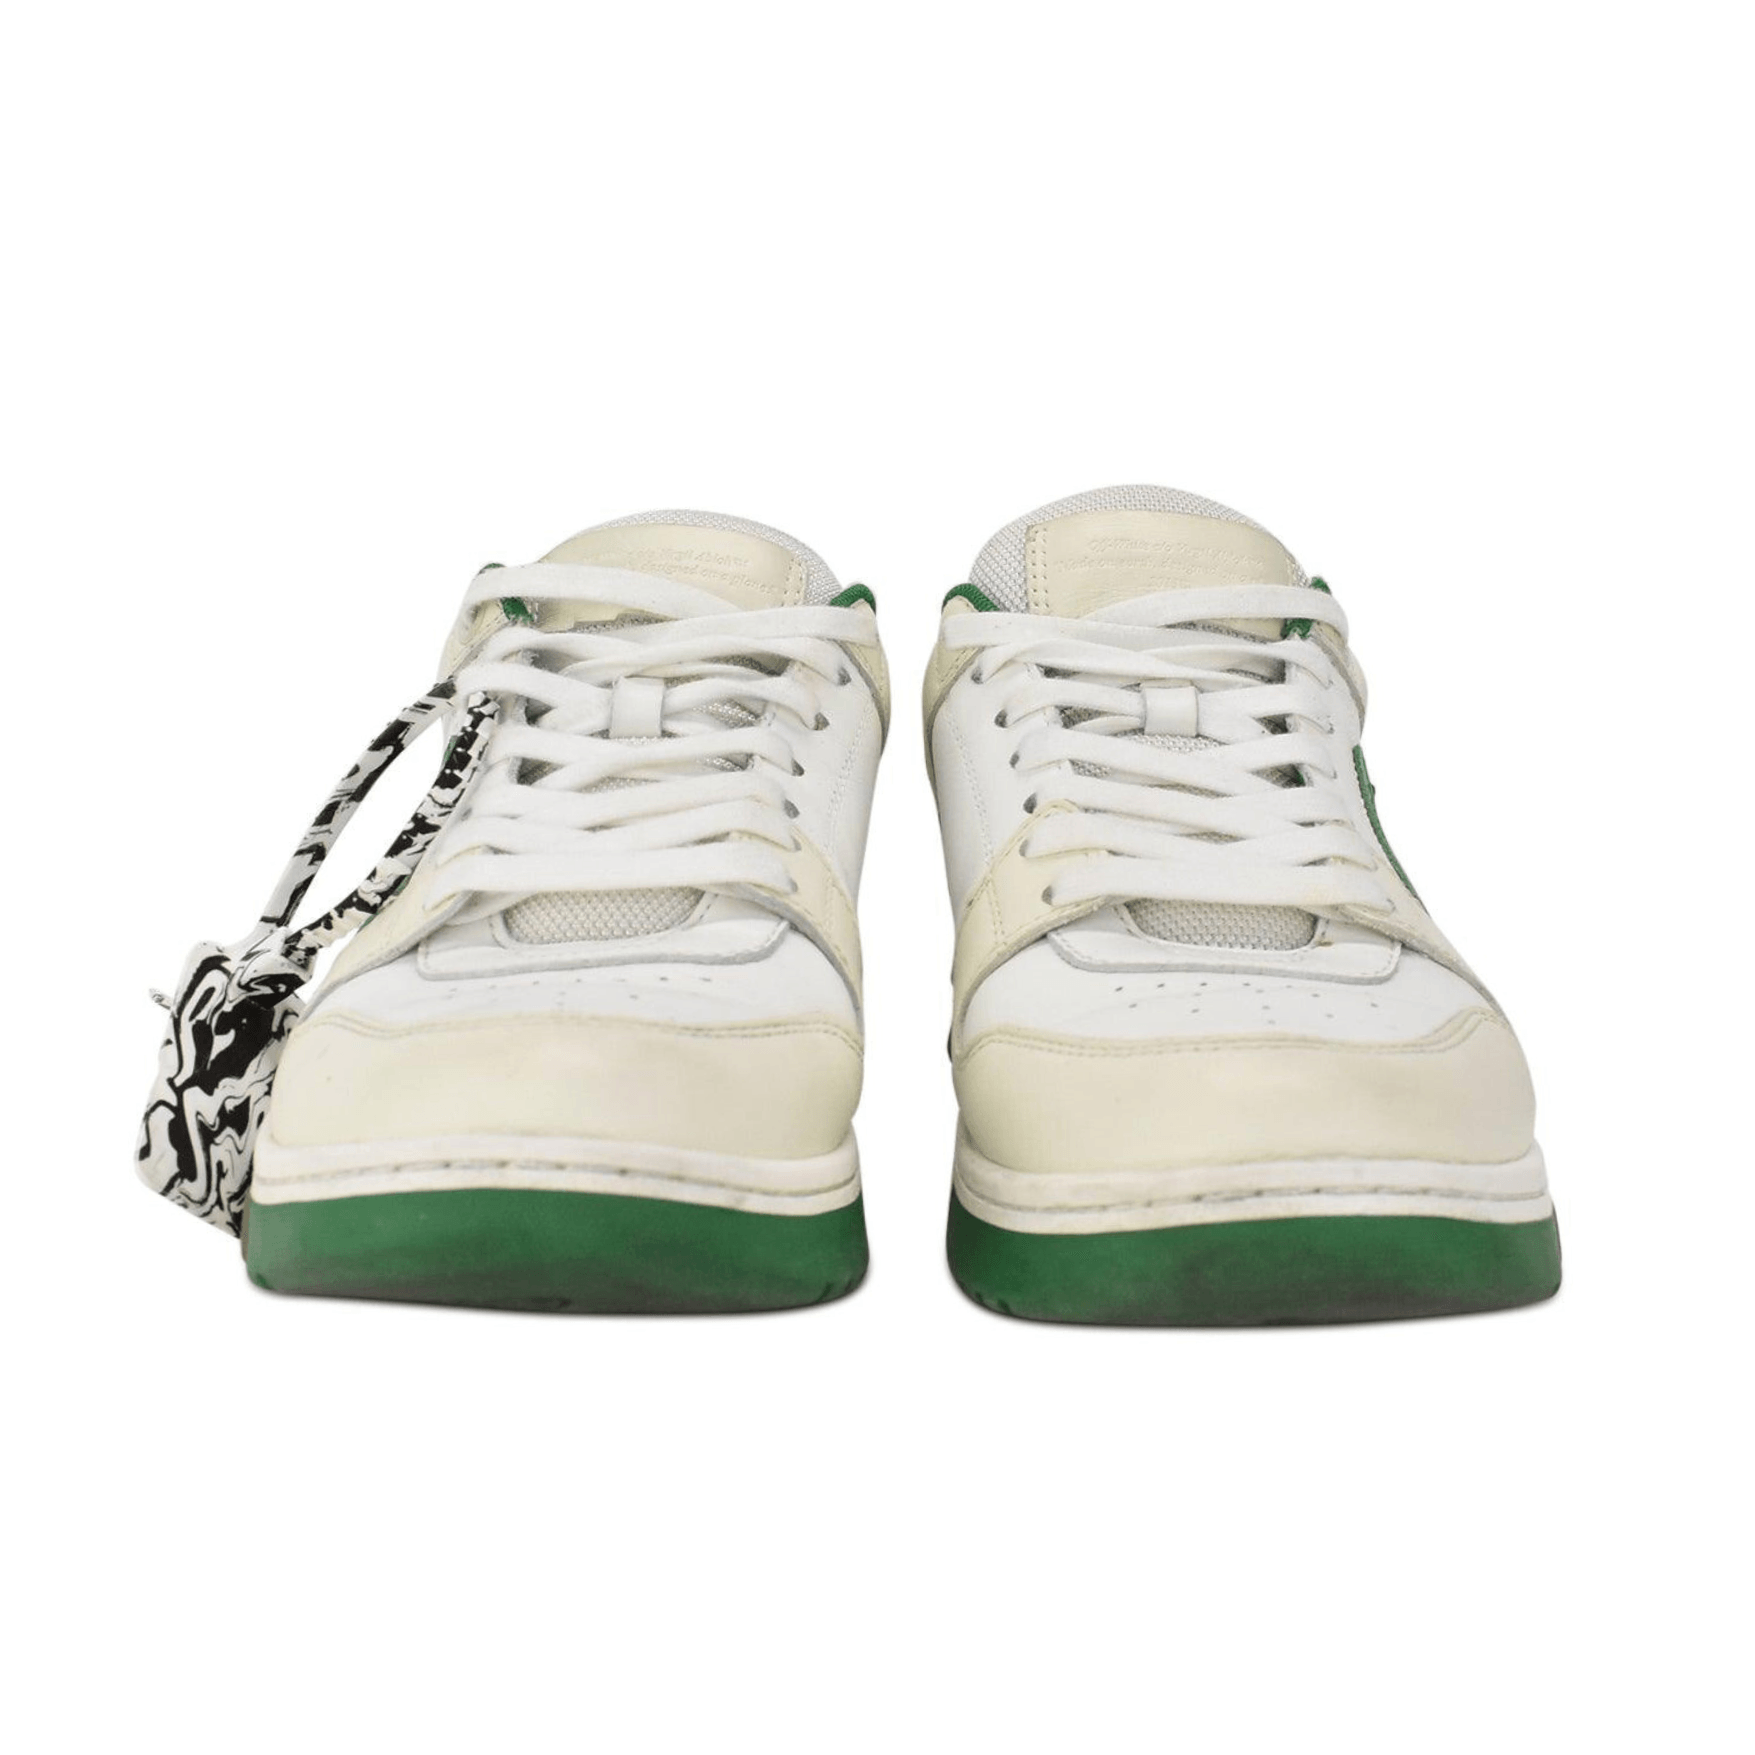 Off-White Sneakers - Men's 41 - Fashionably Yours